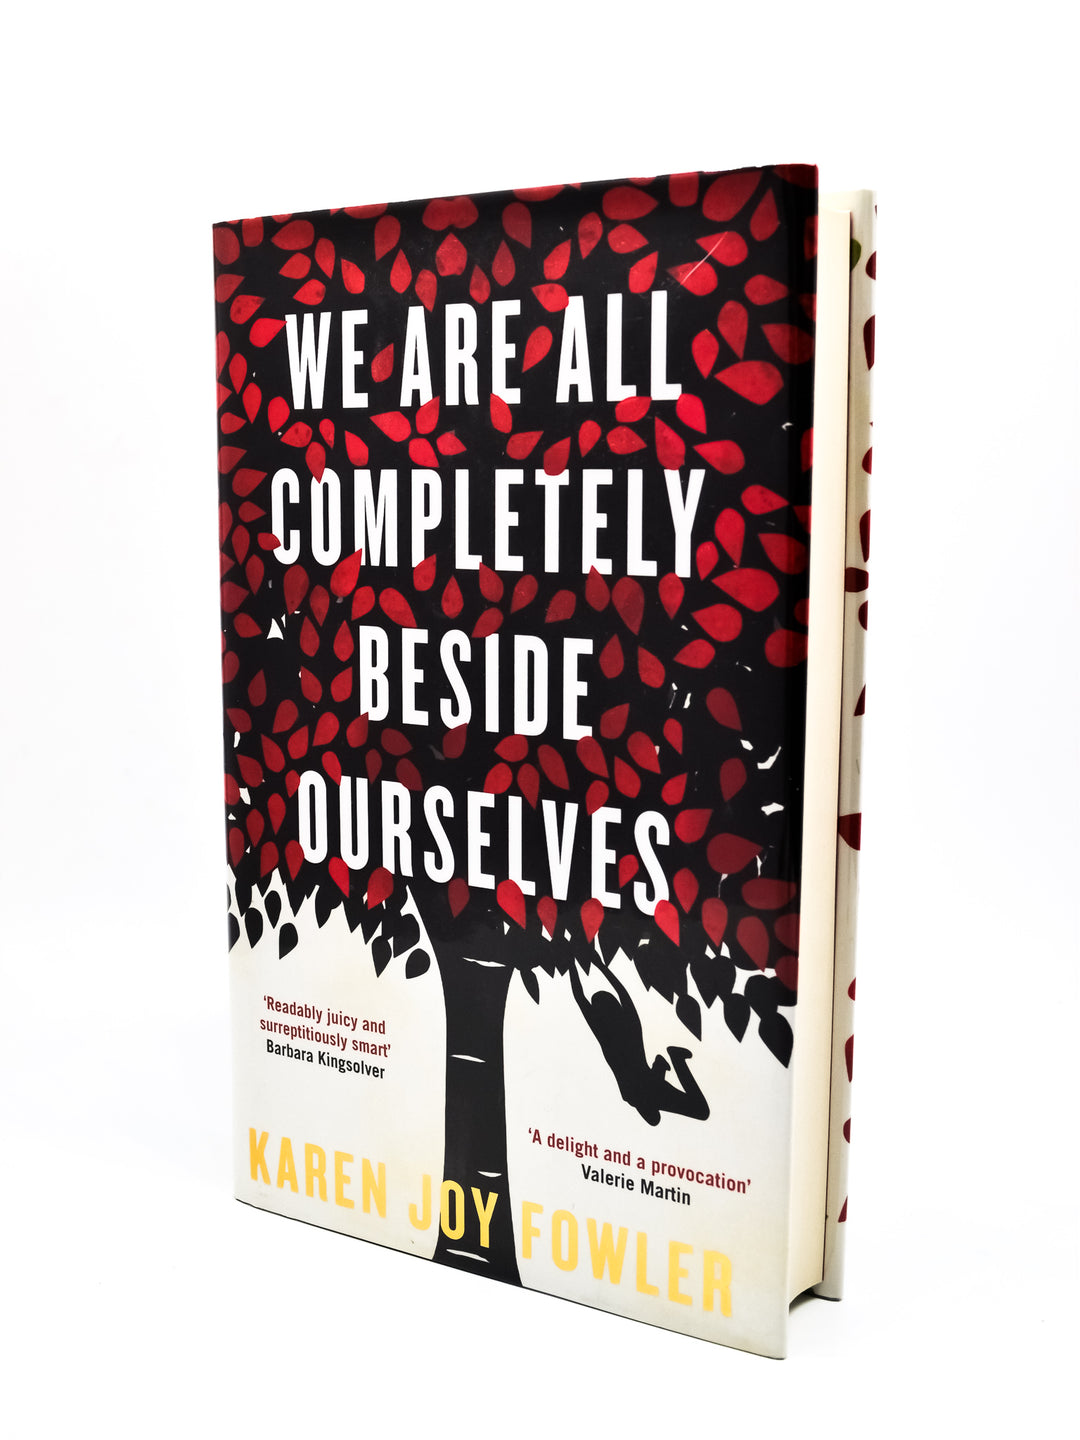 Fowler, Karen Joy - We Are All Completely Beside Ourselves - SIGNED